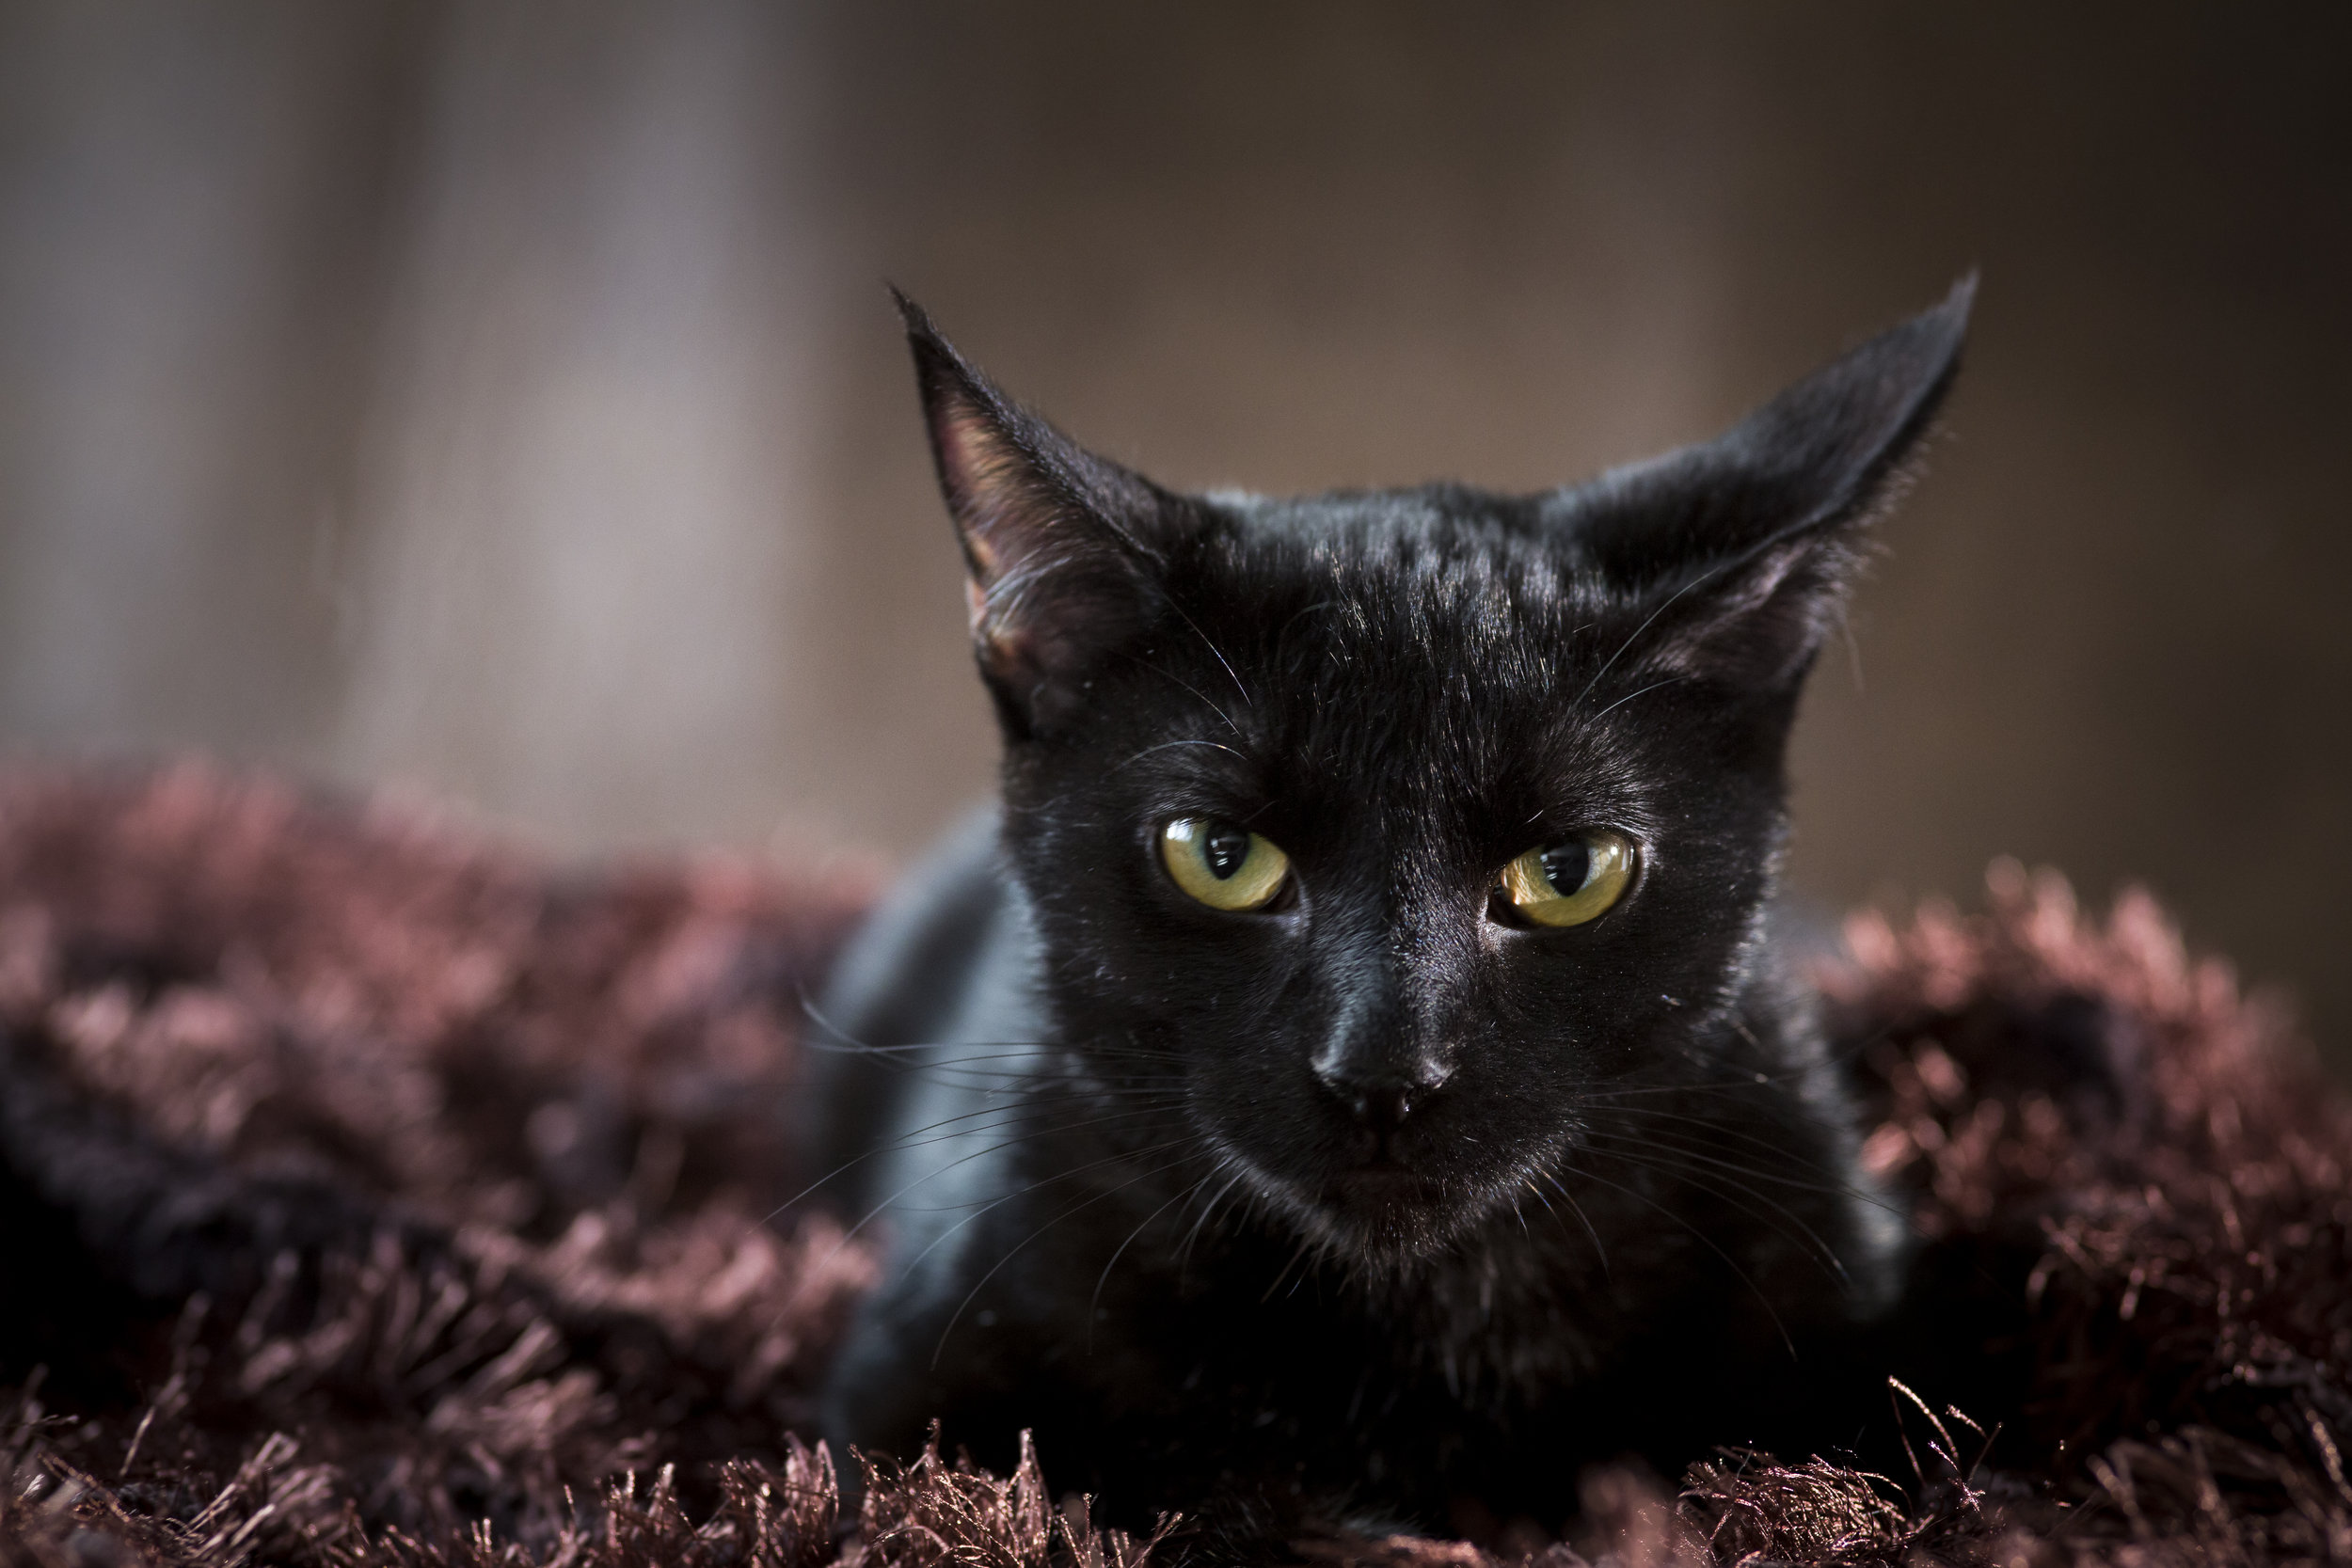 36 black cat pet photography studio session on brown fur rug with leather background cool eyes.jpg